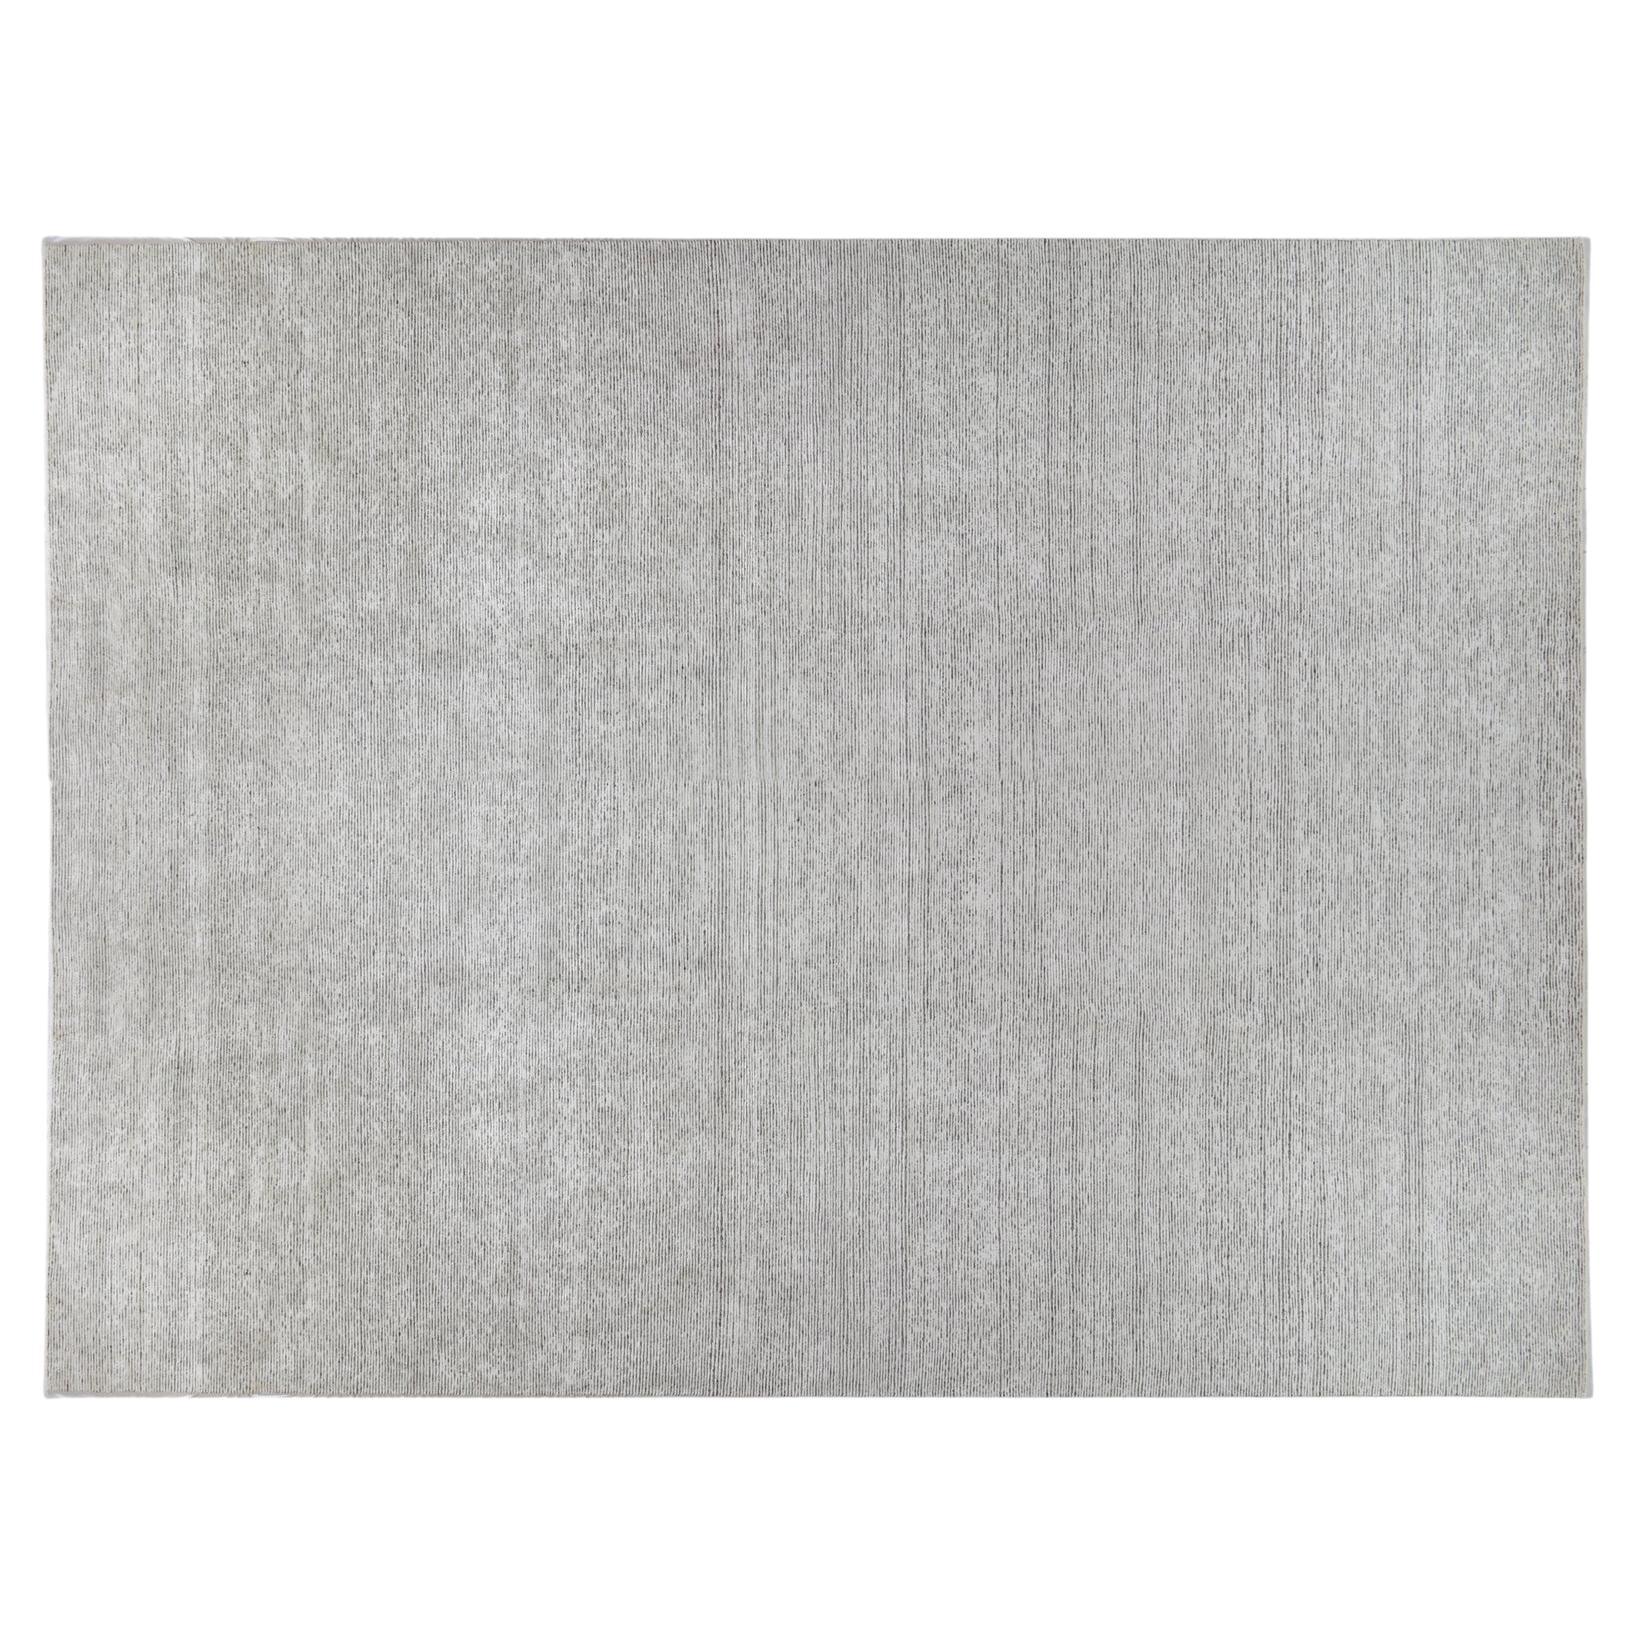 Ivory and Charcoal Stripe Large Area Rug